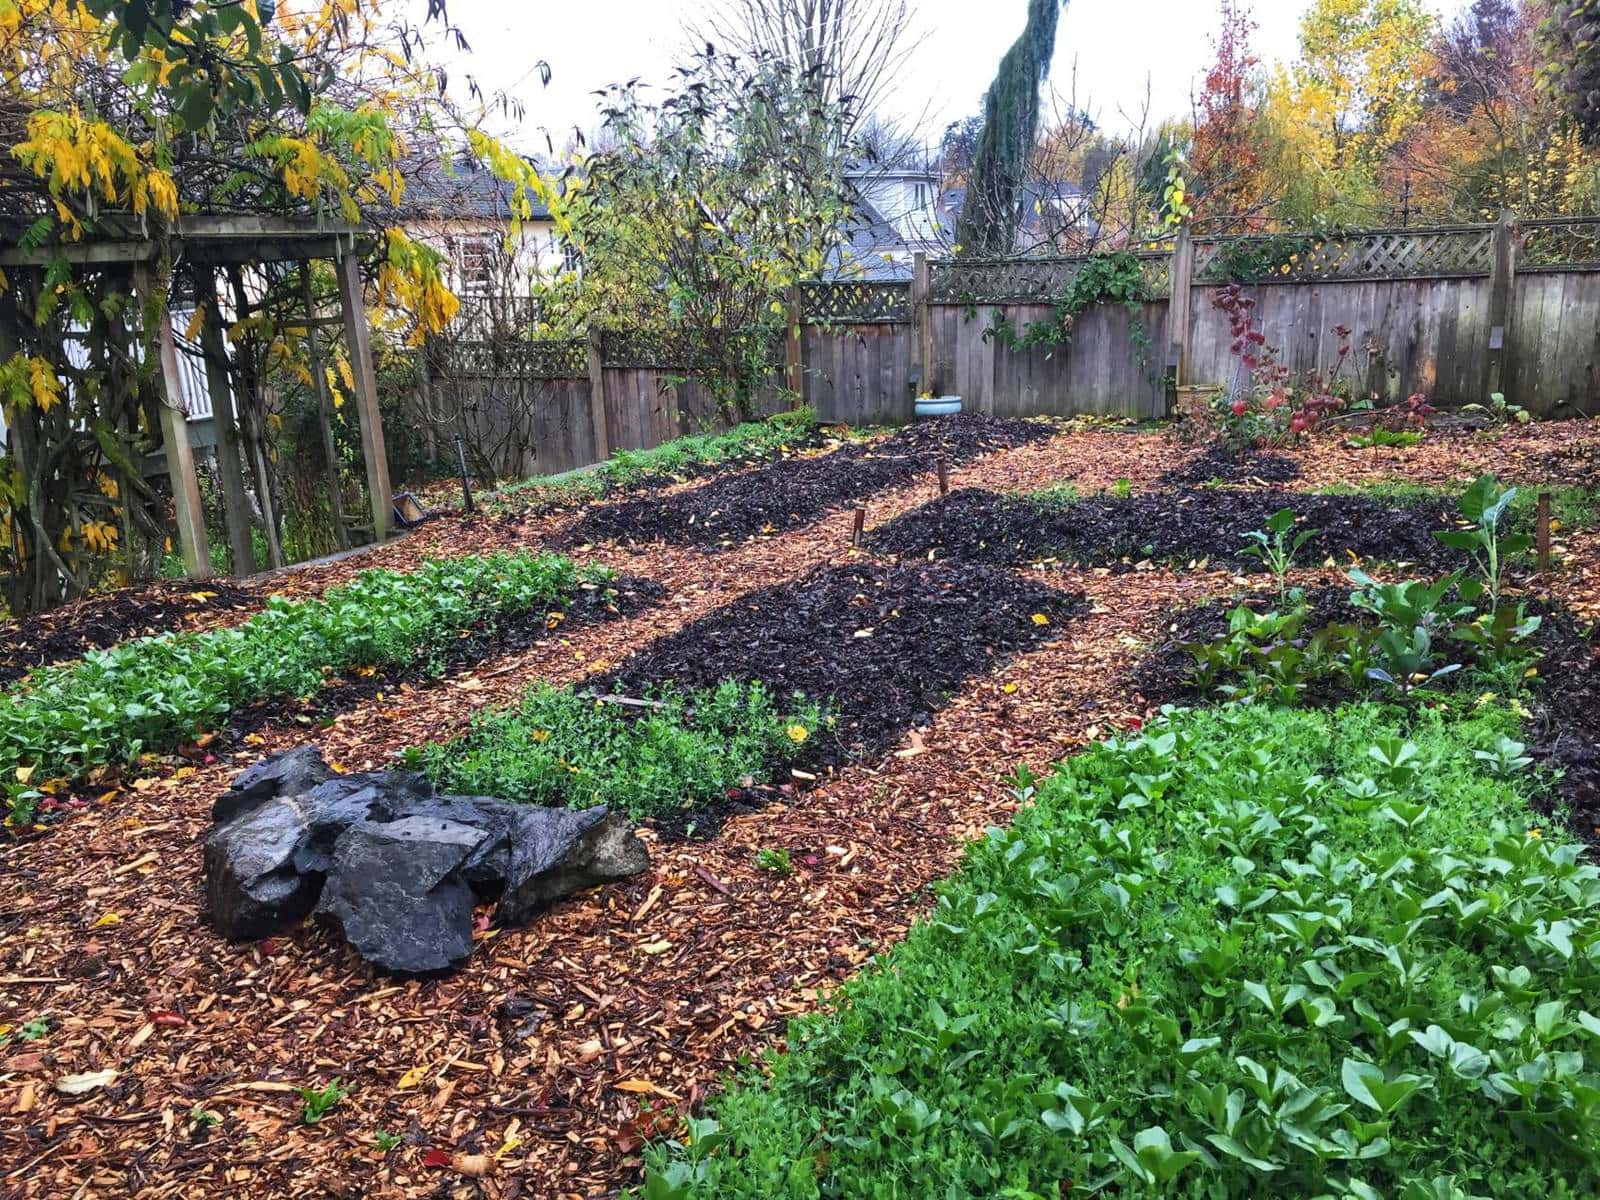 A friend of a friend contacted us about having us grow food in their backyard. With the help of our backyard gardening class we've transformed it into a micro-farm.